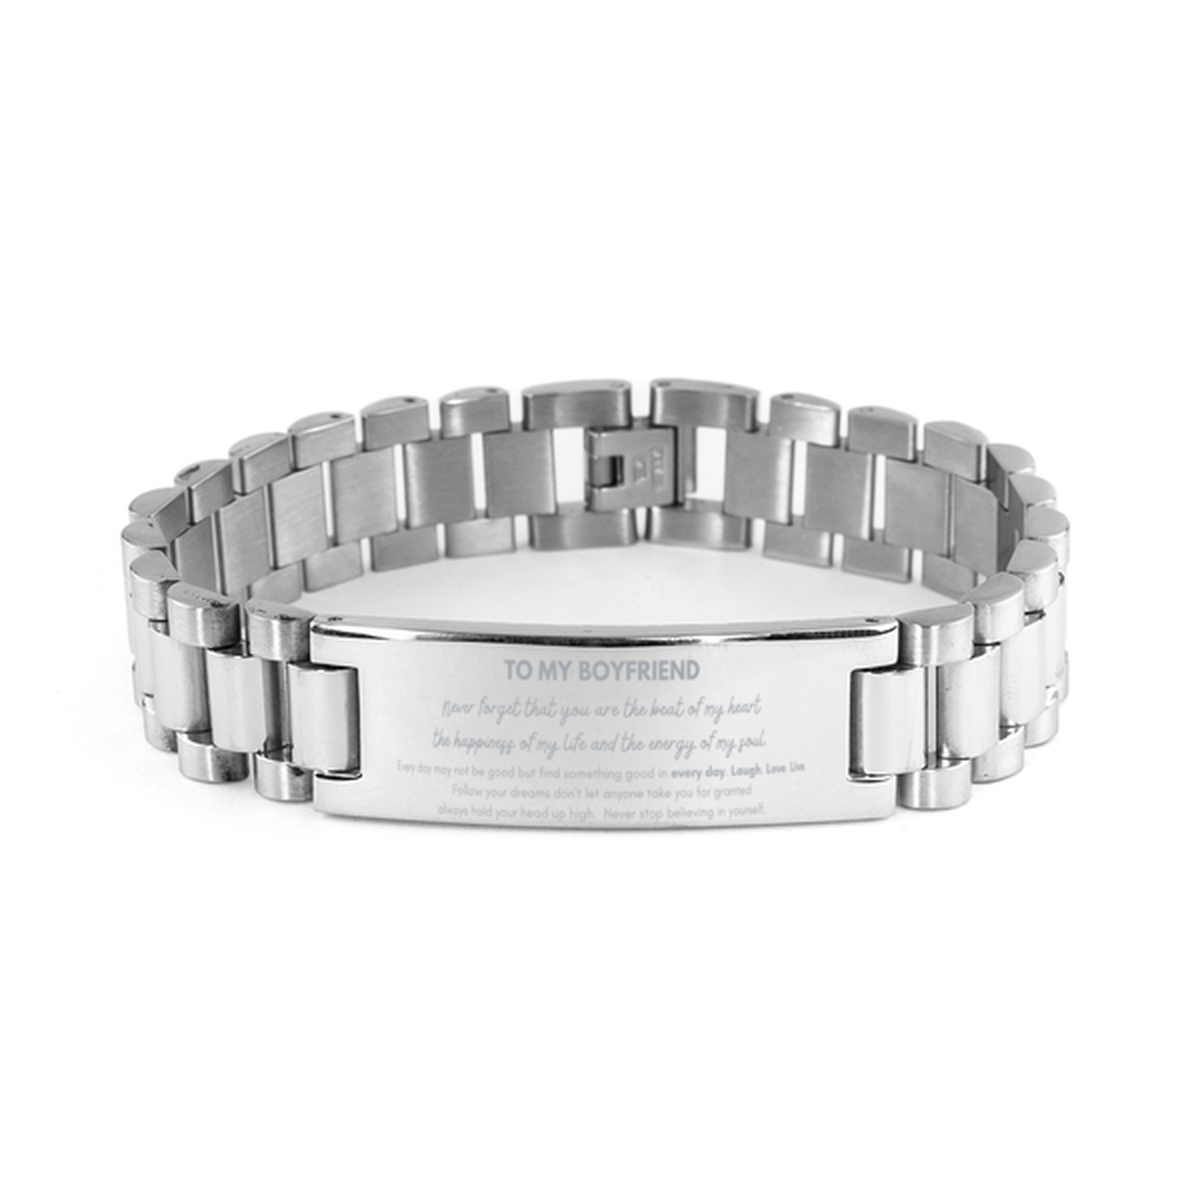 To My Boyfriend Bracelet Gifts, Christmas Boyfriend Ladder Stainless Steel Bracelet Present, Birthday Unique Motivational For Boyfriend, To My Boyfriend Never forget that you are the beat of my heart the happiness of my life and the energy of my soul